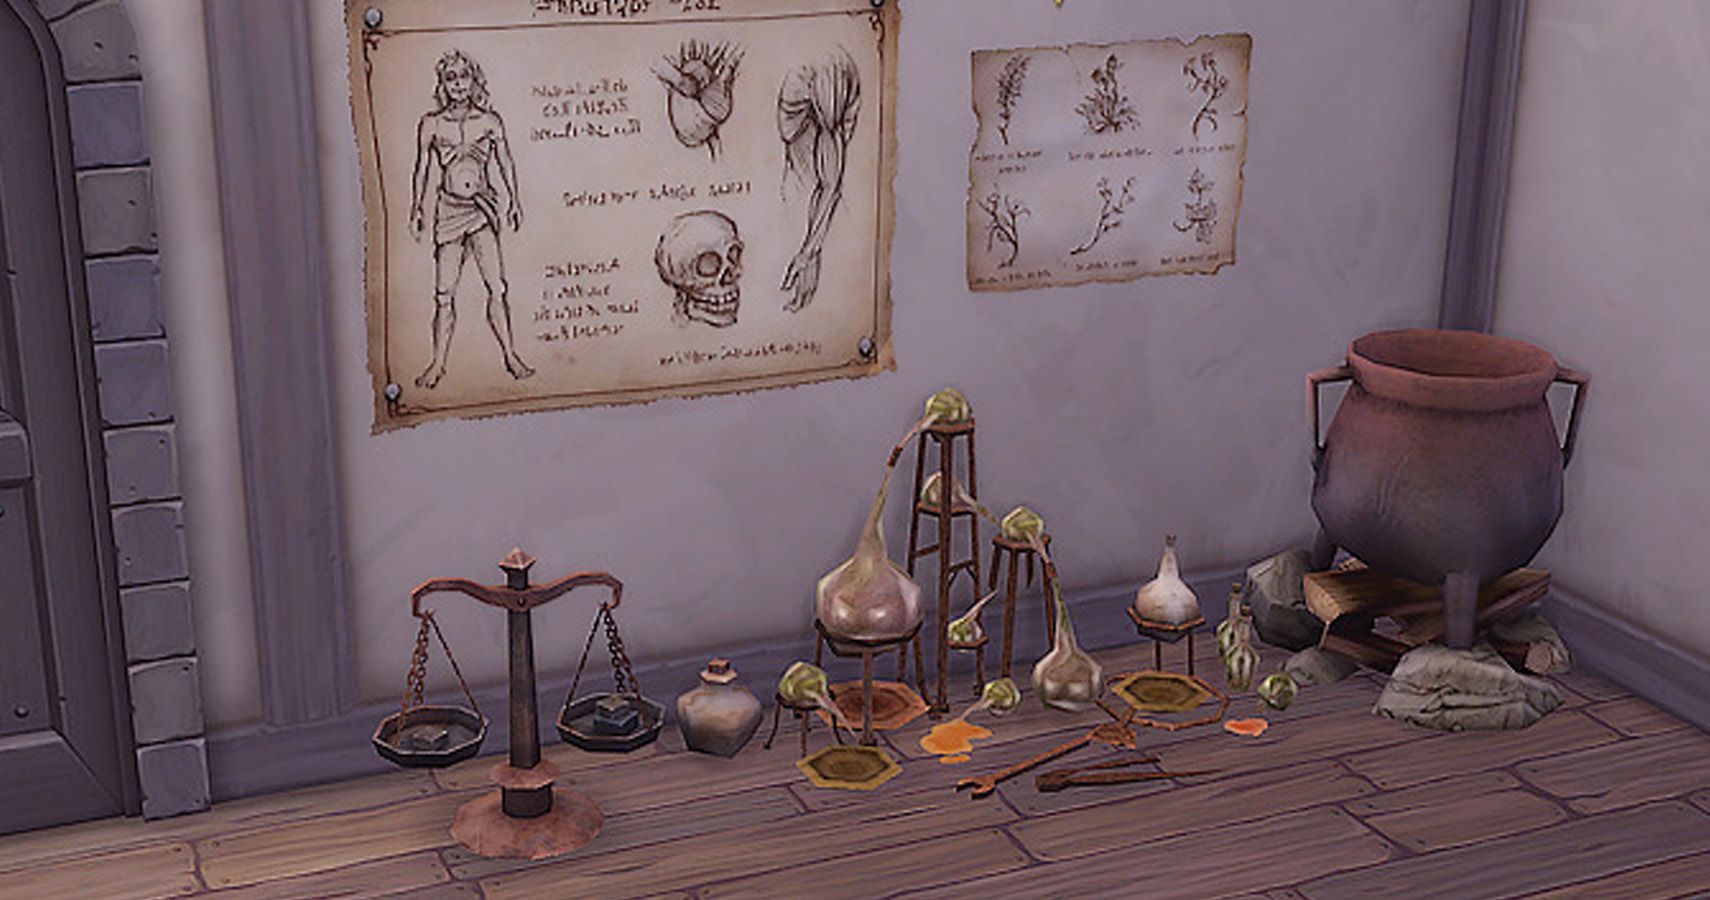 A brewing set from The Sims medieval with scales, cauldron and jars.